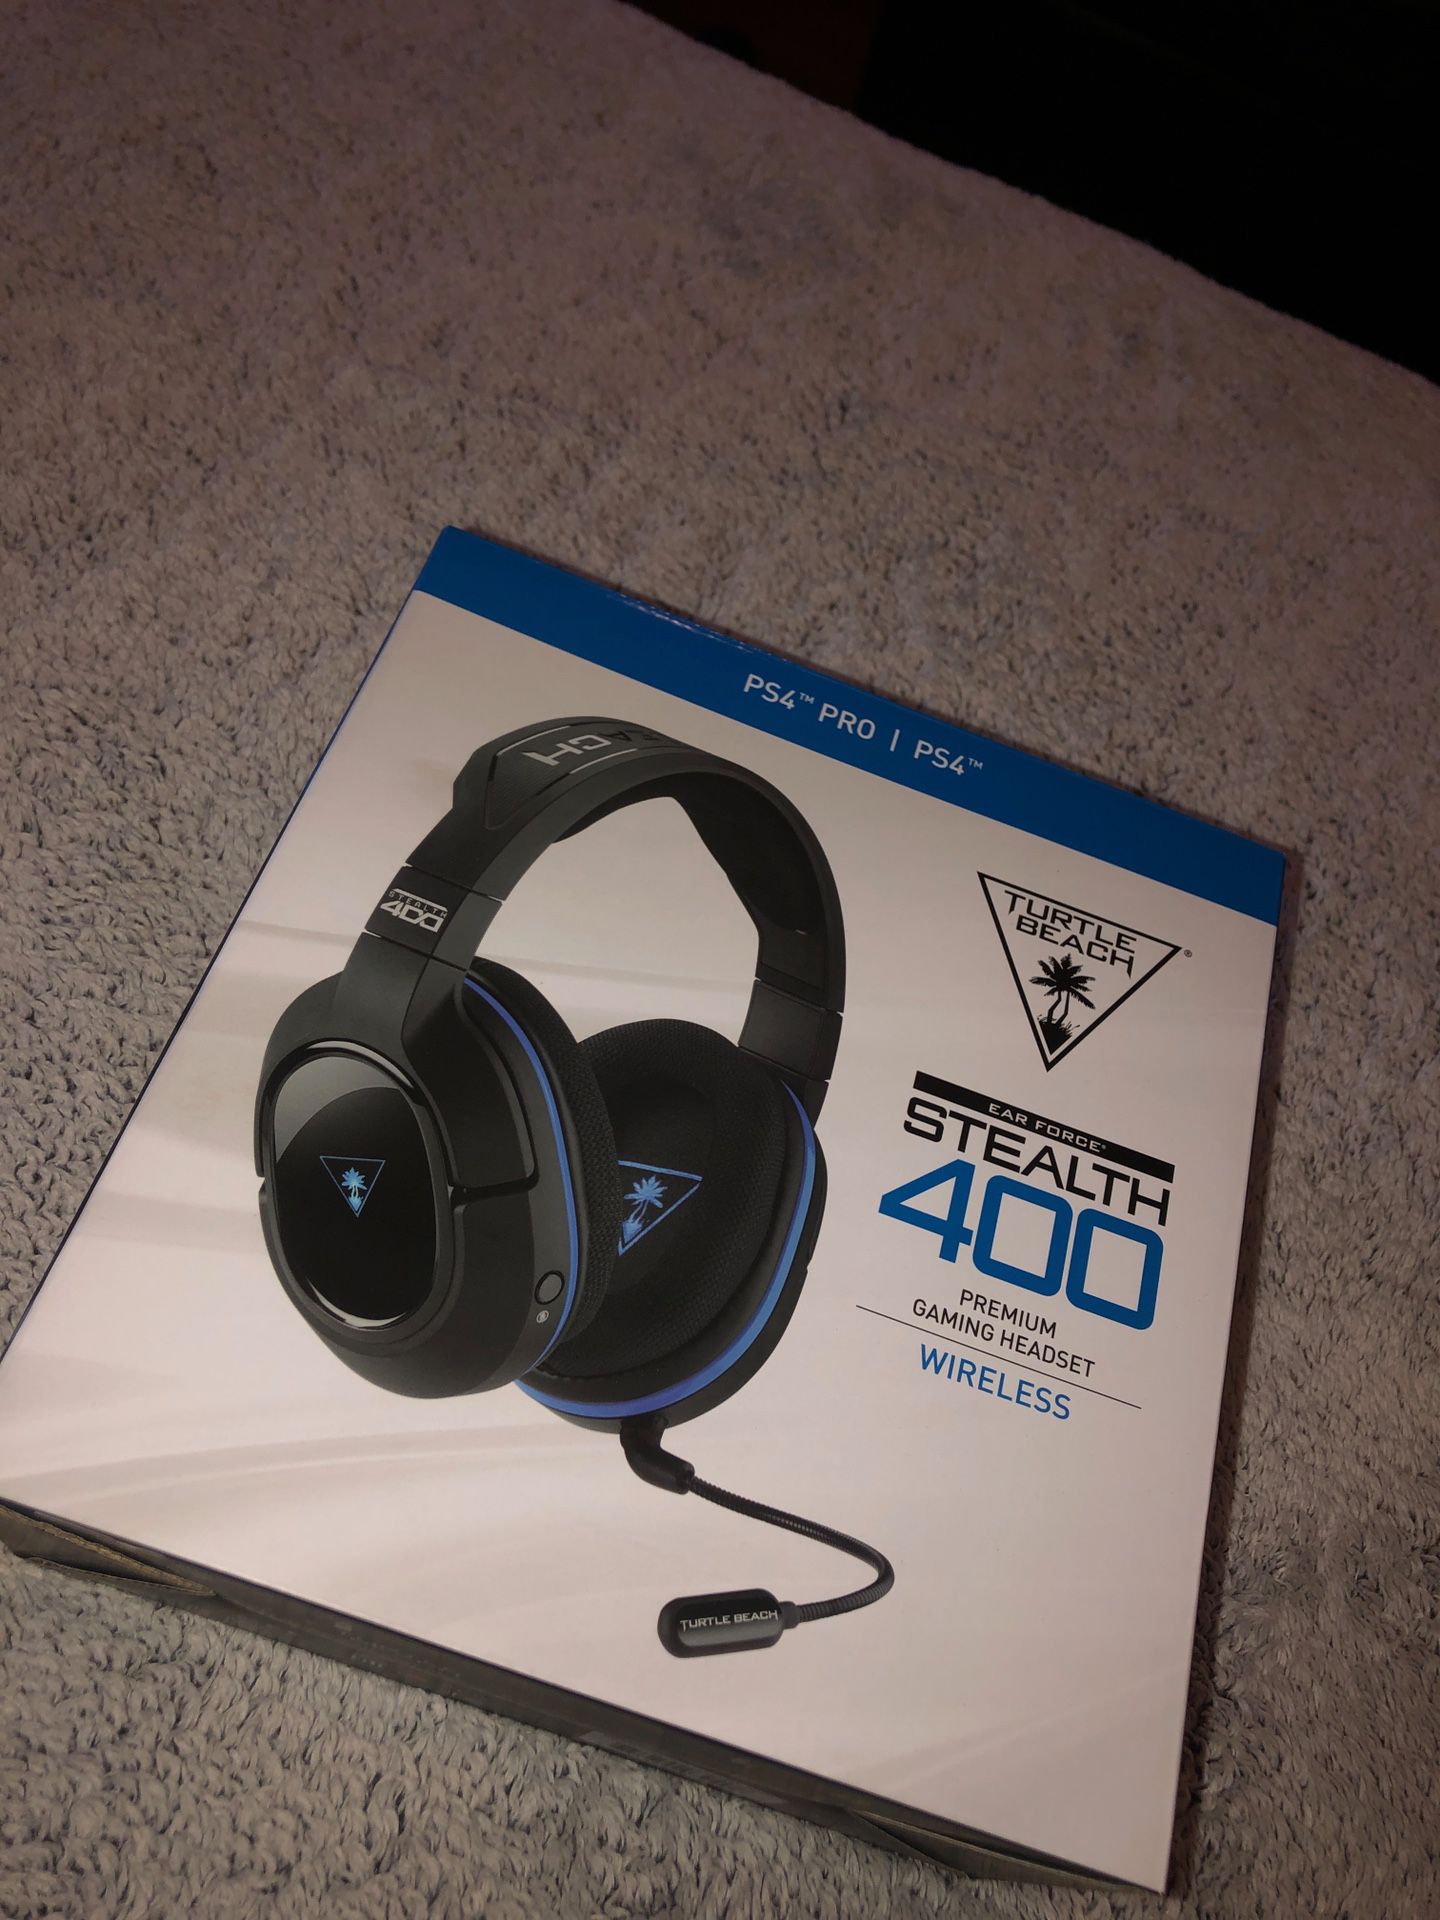 PS4 Turtle Beach Stealth 400 Bluetooth wireless Gaming headset